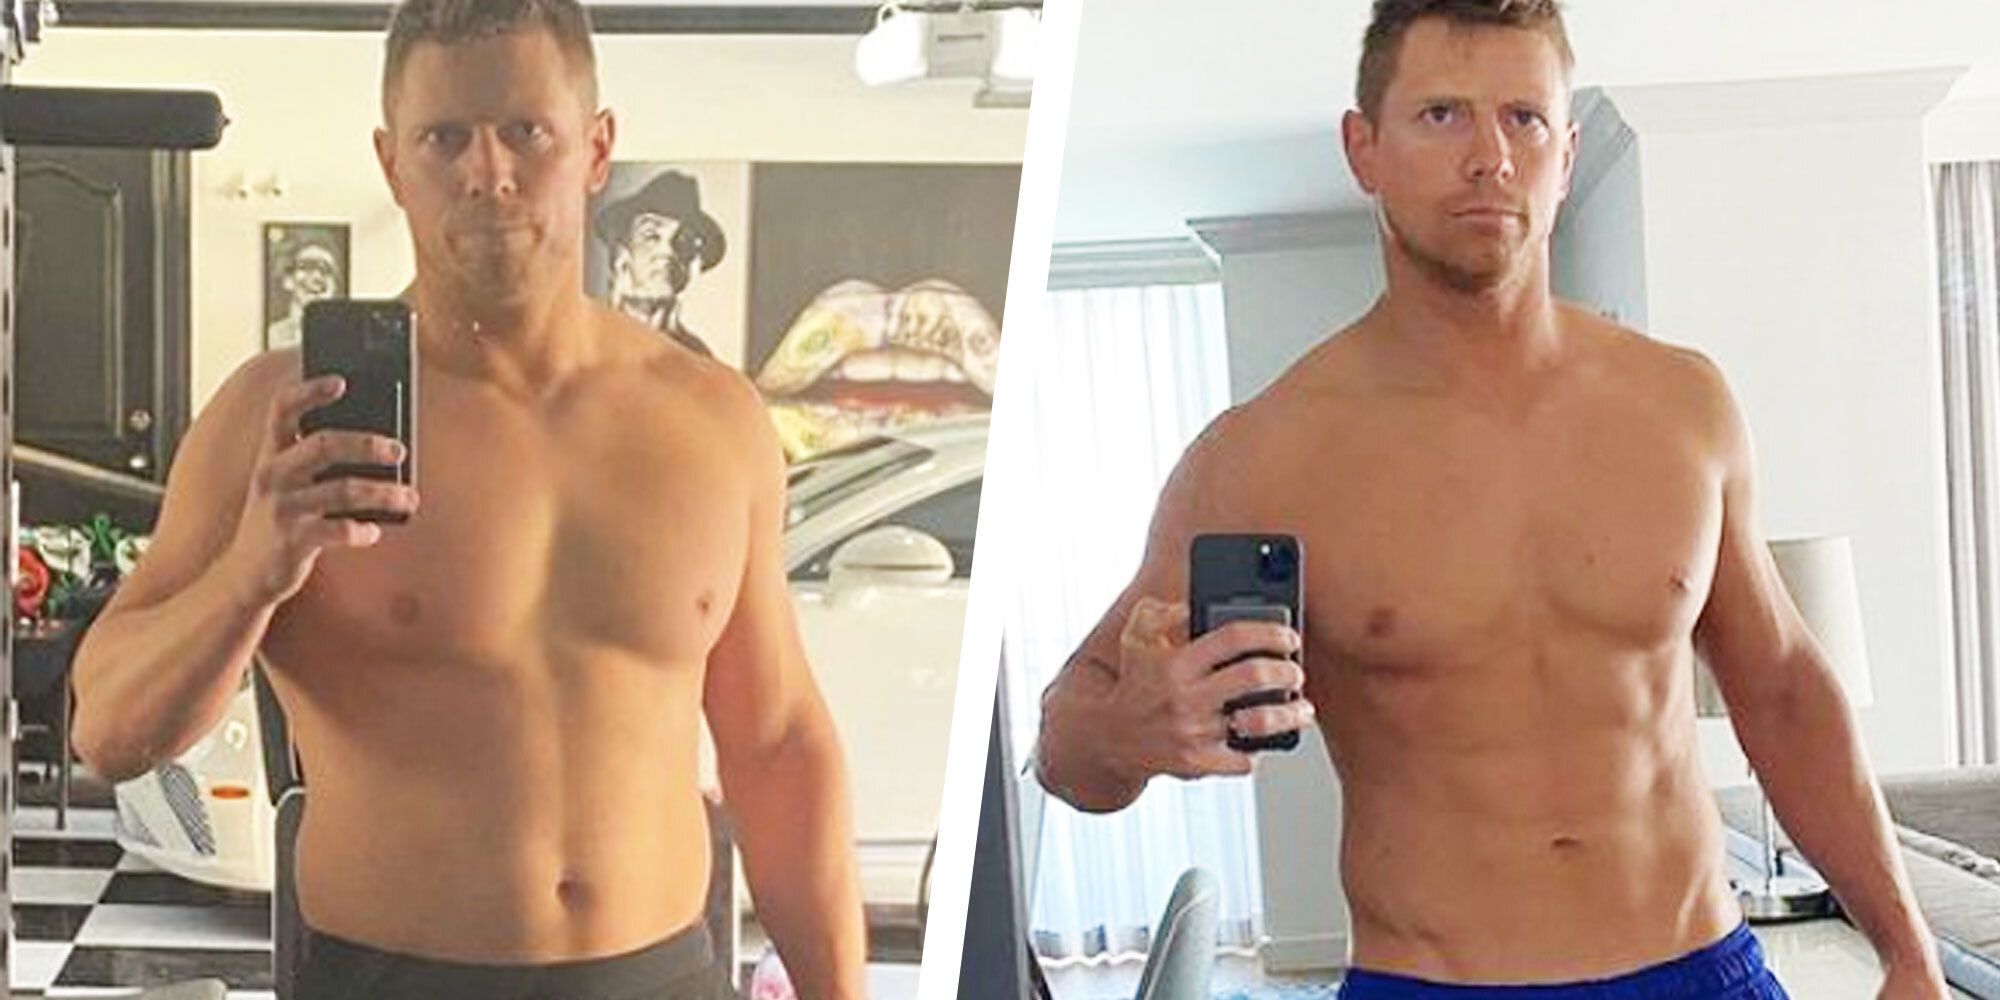 WWEs The Miz Shared How He Got Ripped Abs in 4 Months pic